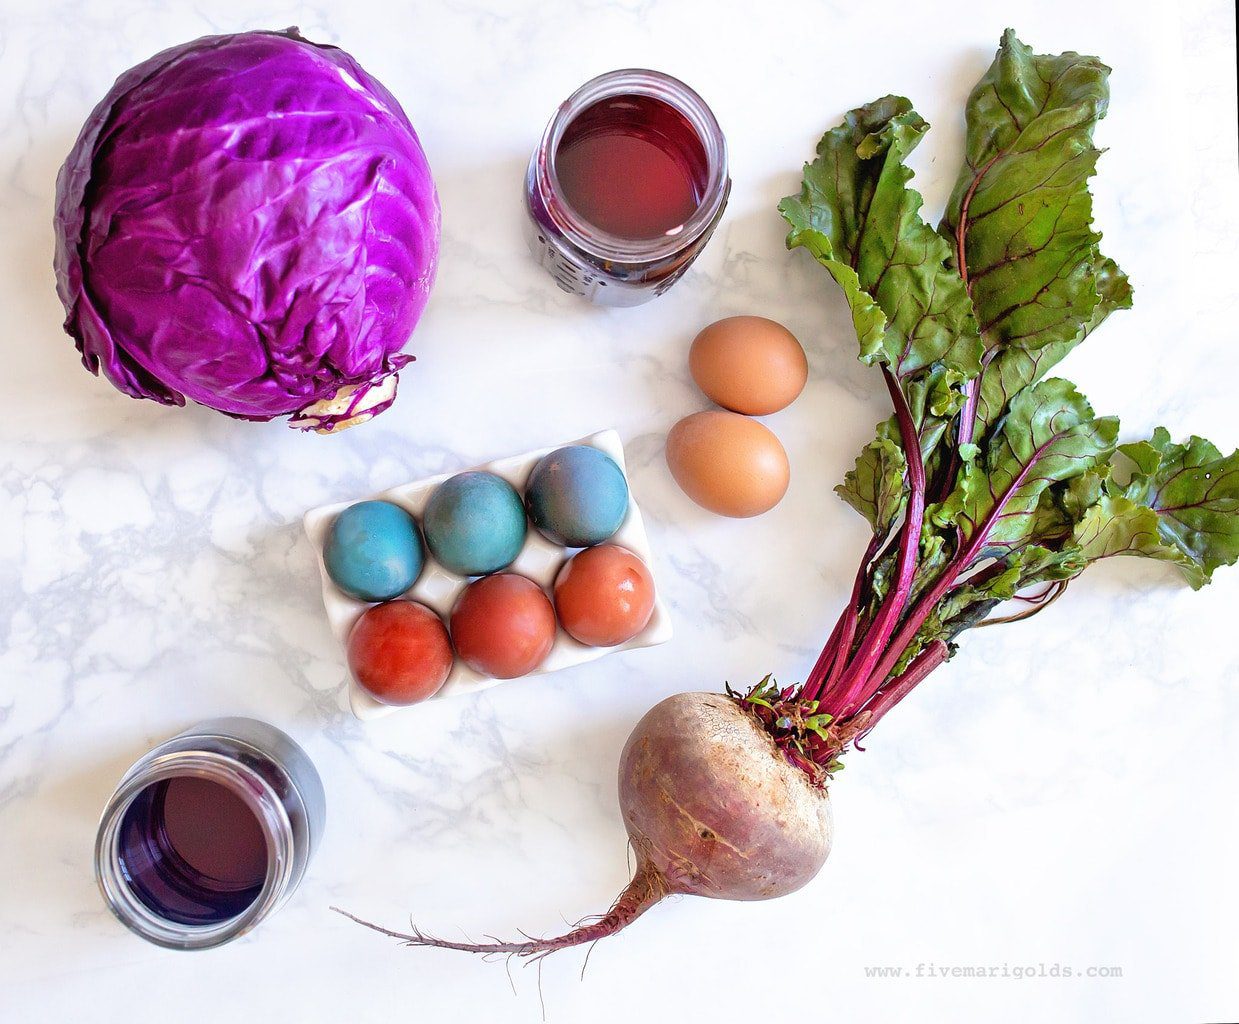 Naturally dye brown easter eggs with red cabbage and beets